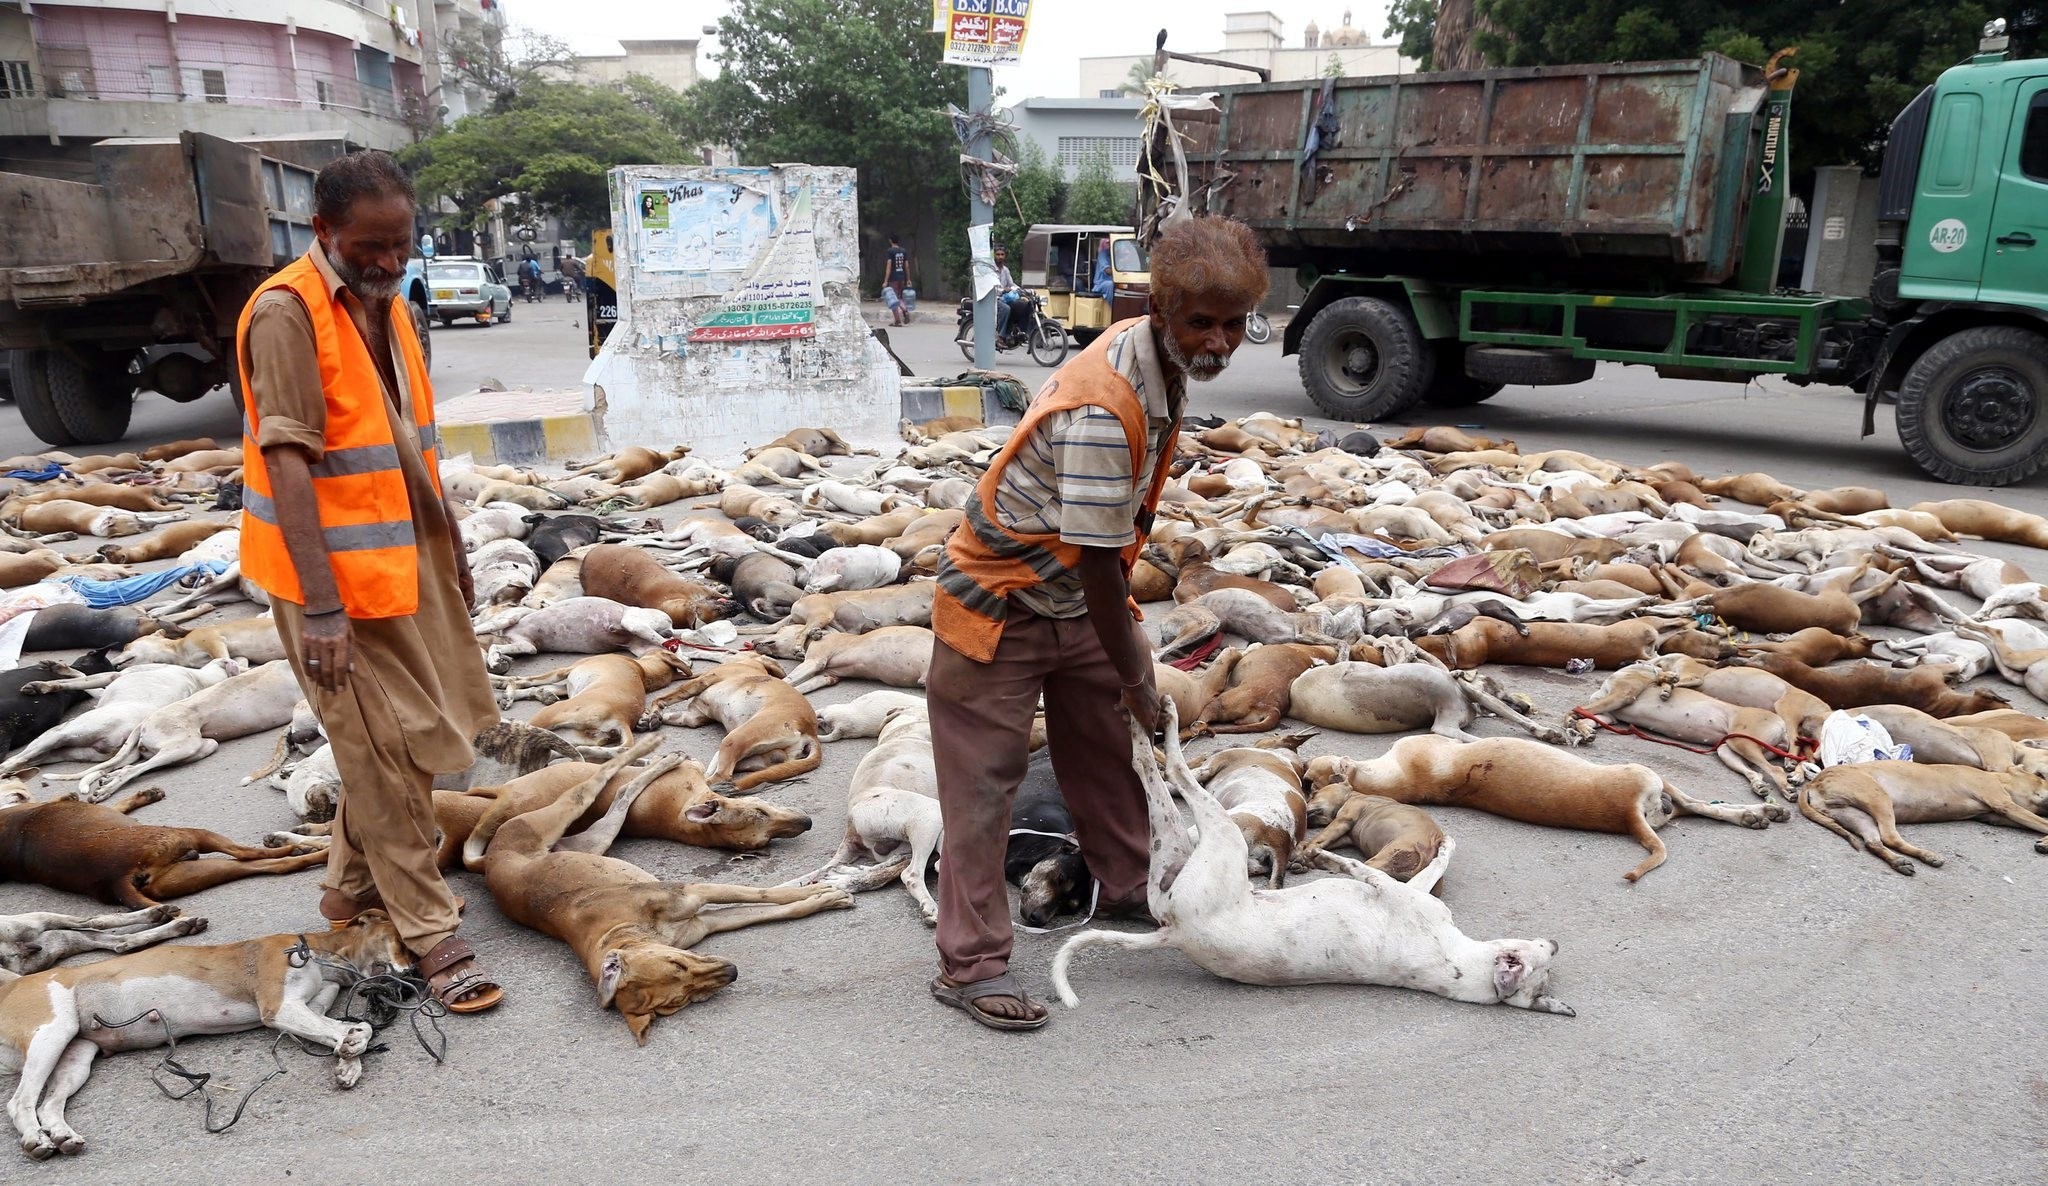 Municipality workers collect the dead bodies of stray dogs during an anti-canine drive in Karachi, Pakistan, 04 August 2016. (REUTERS Photo)